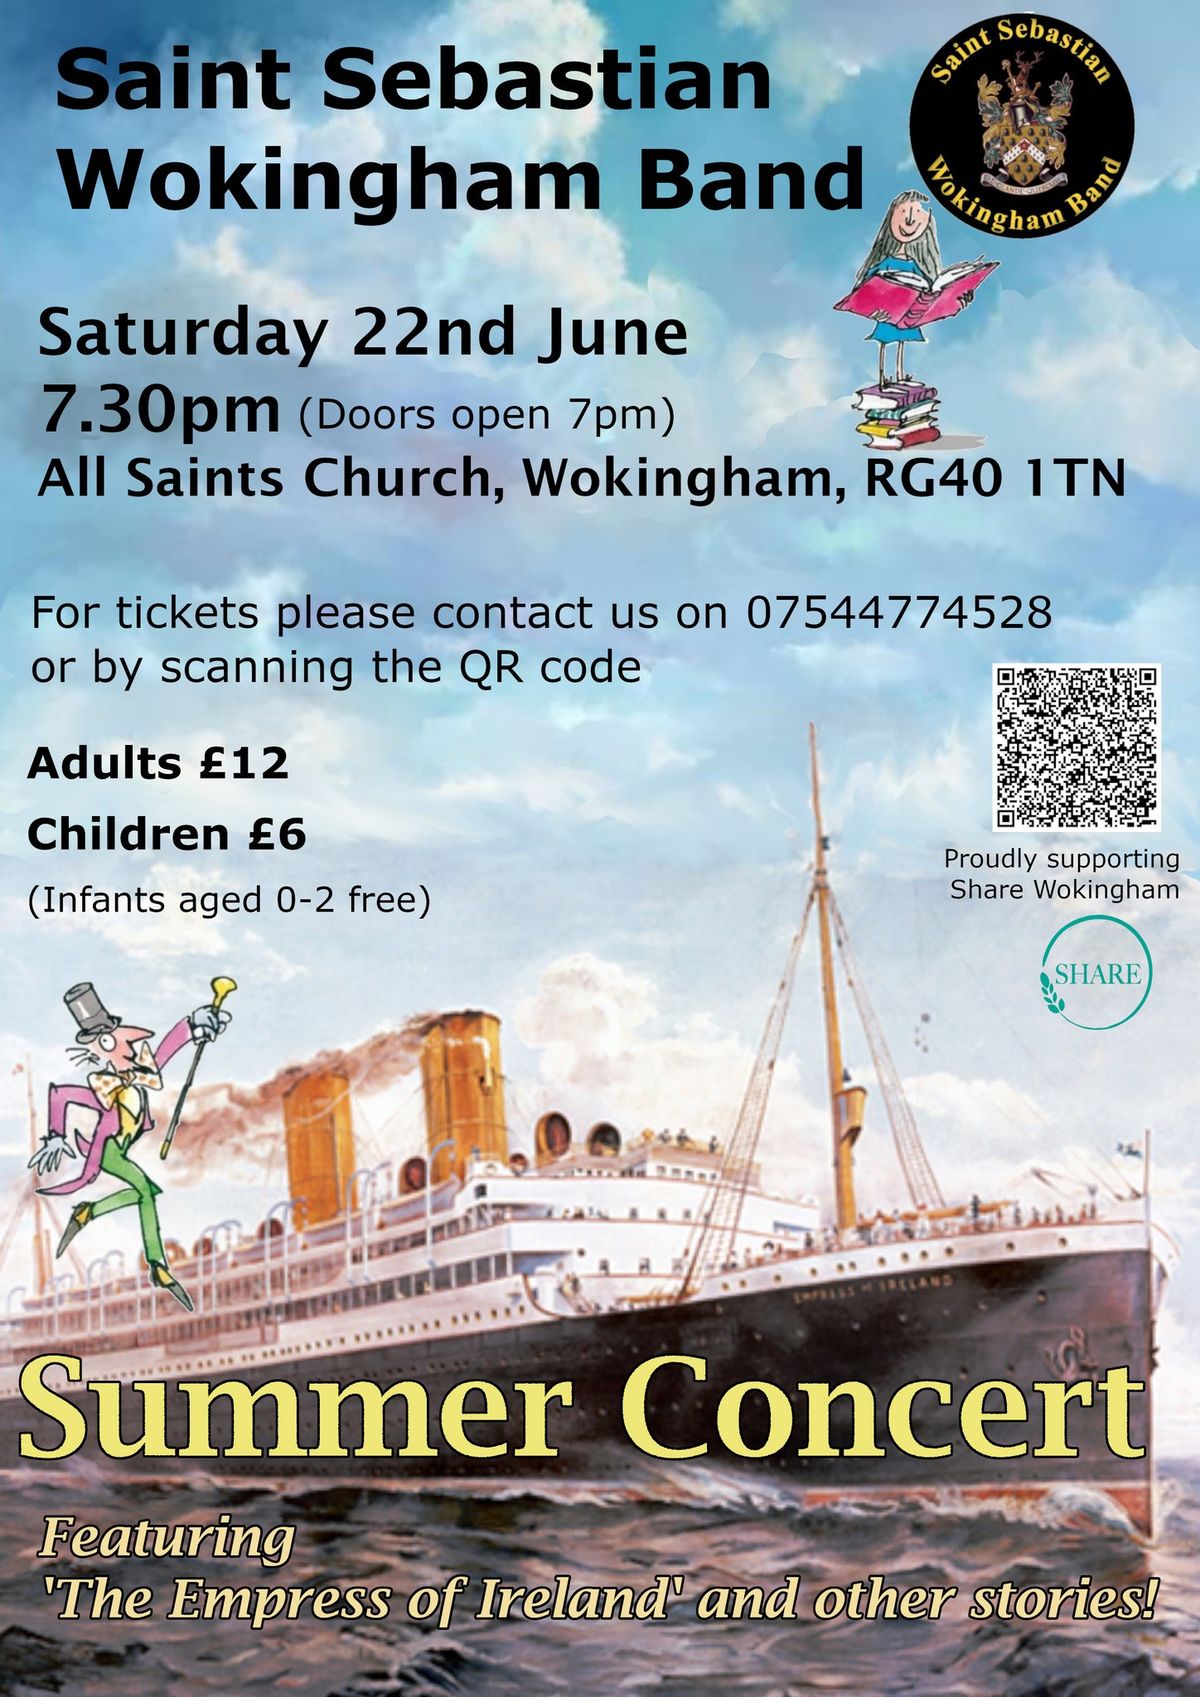 St Sebastian Summer Concert - Featuring 'The Empress of Ireland' and other stories!